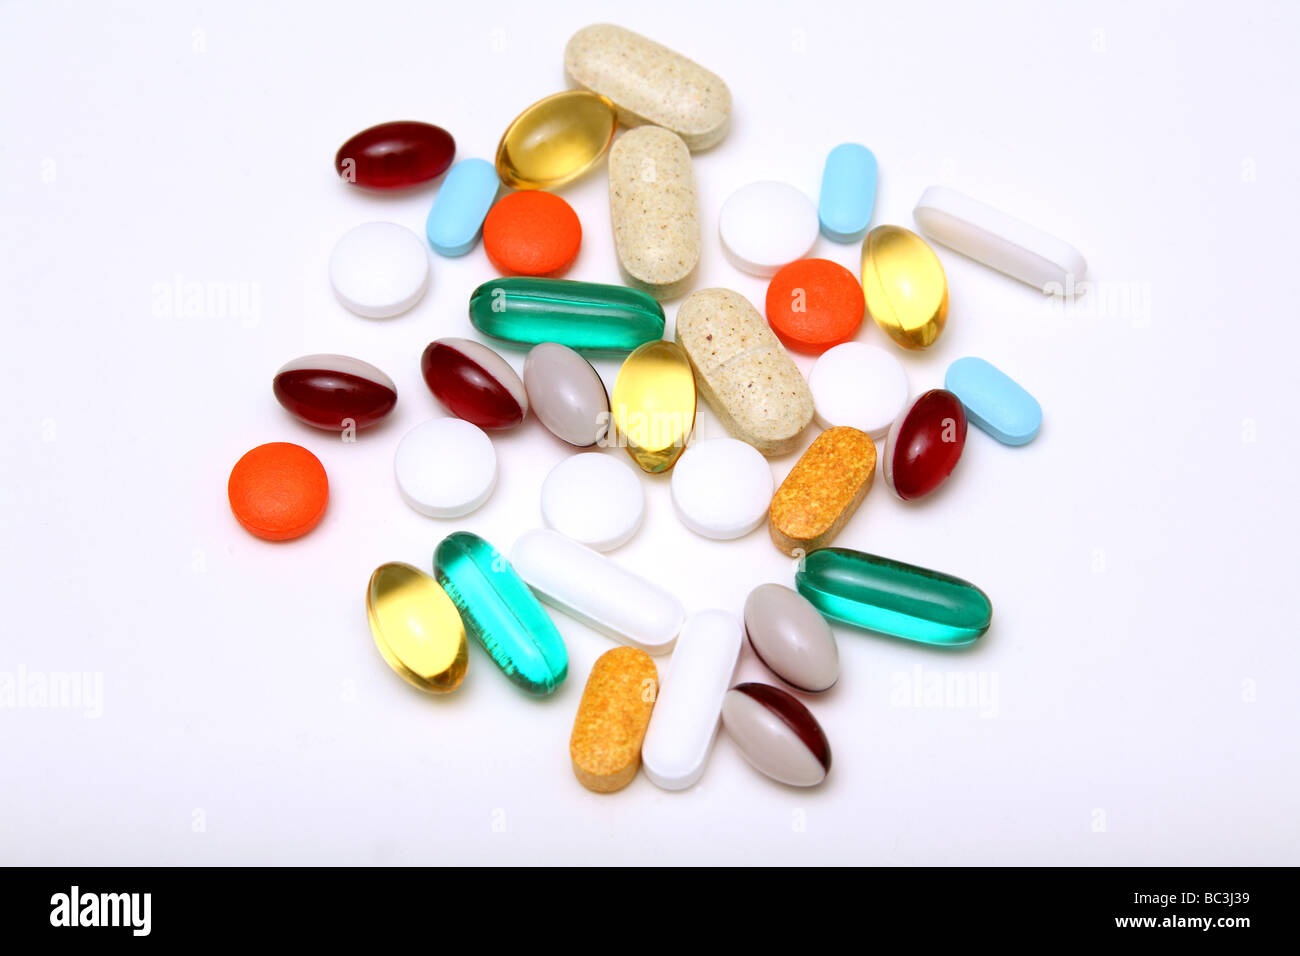 medication and vitamin pills tablets and softgels on neutral background Stock Photo